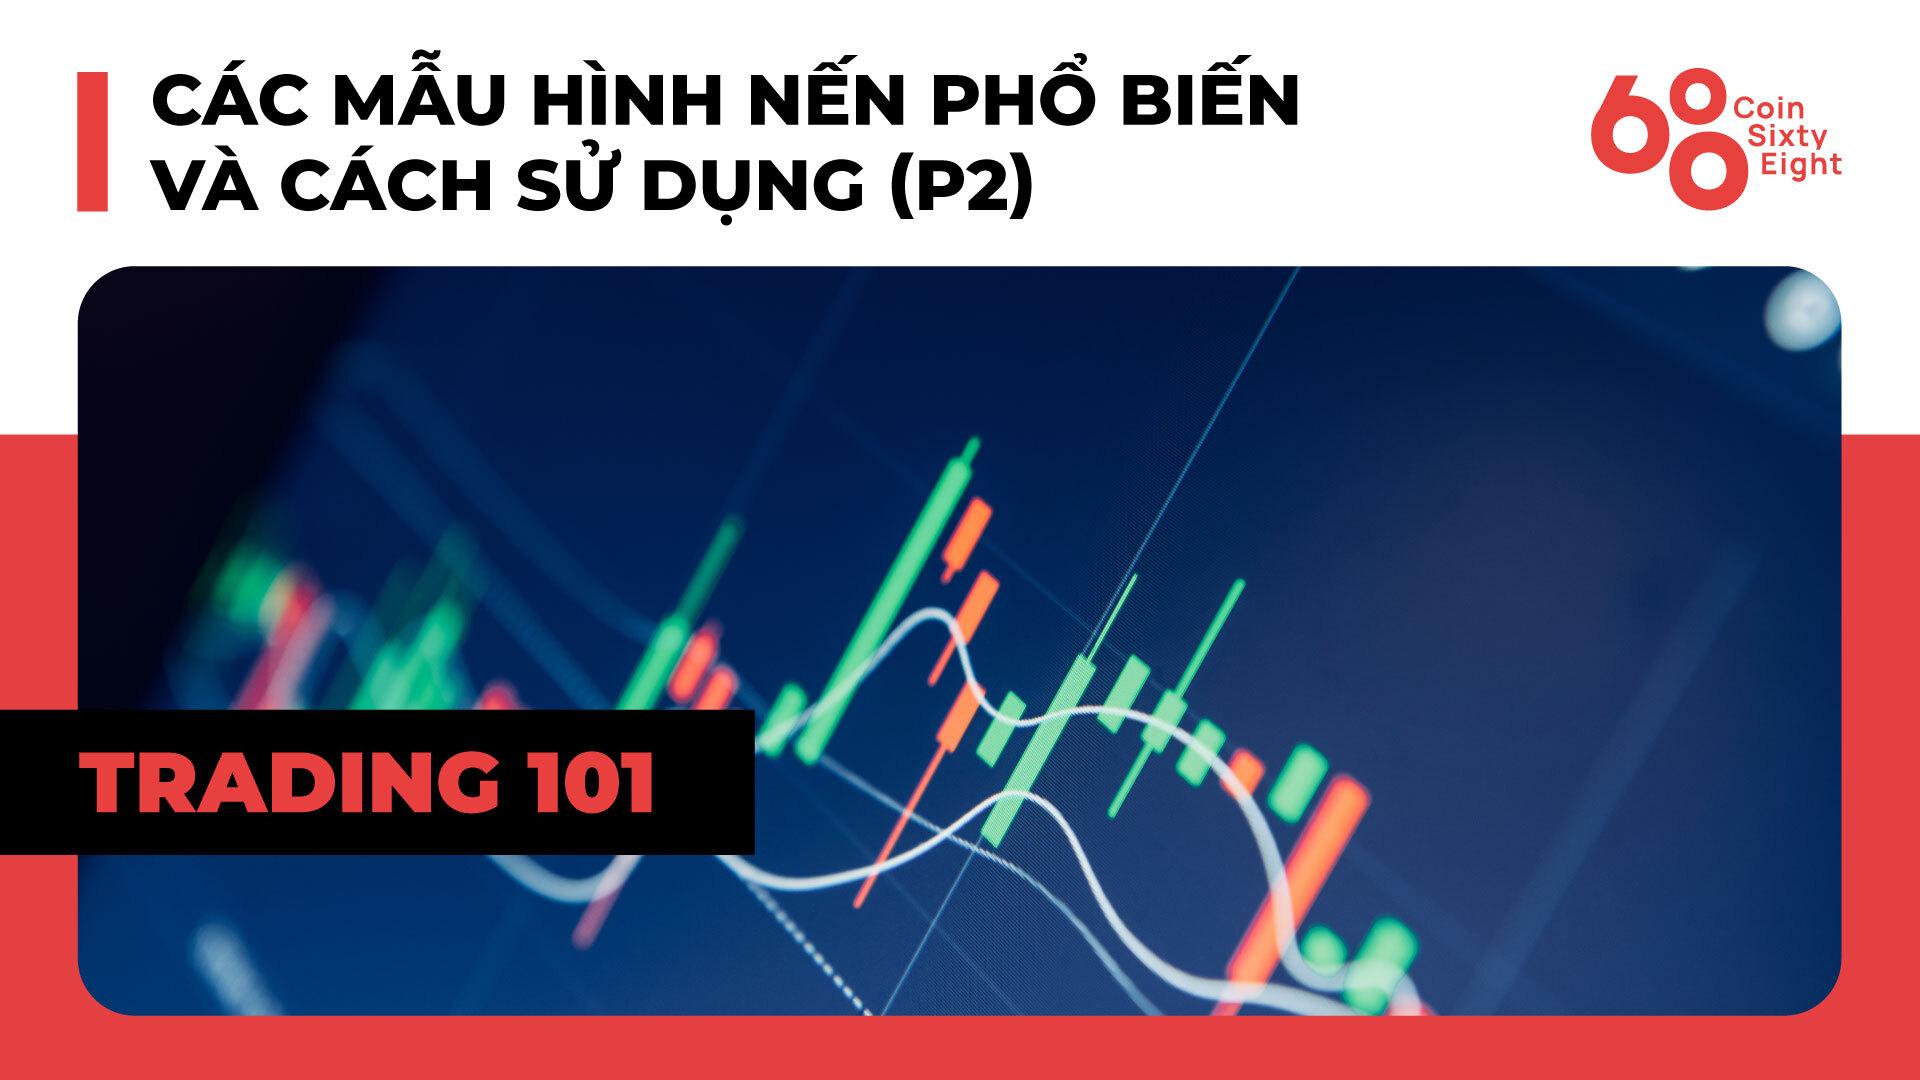 lop-giao-dich-101-price-action-trading-phan-10-cac-mau-hinh-nen-pho-bien-va-cach-su-dung-p2